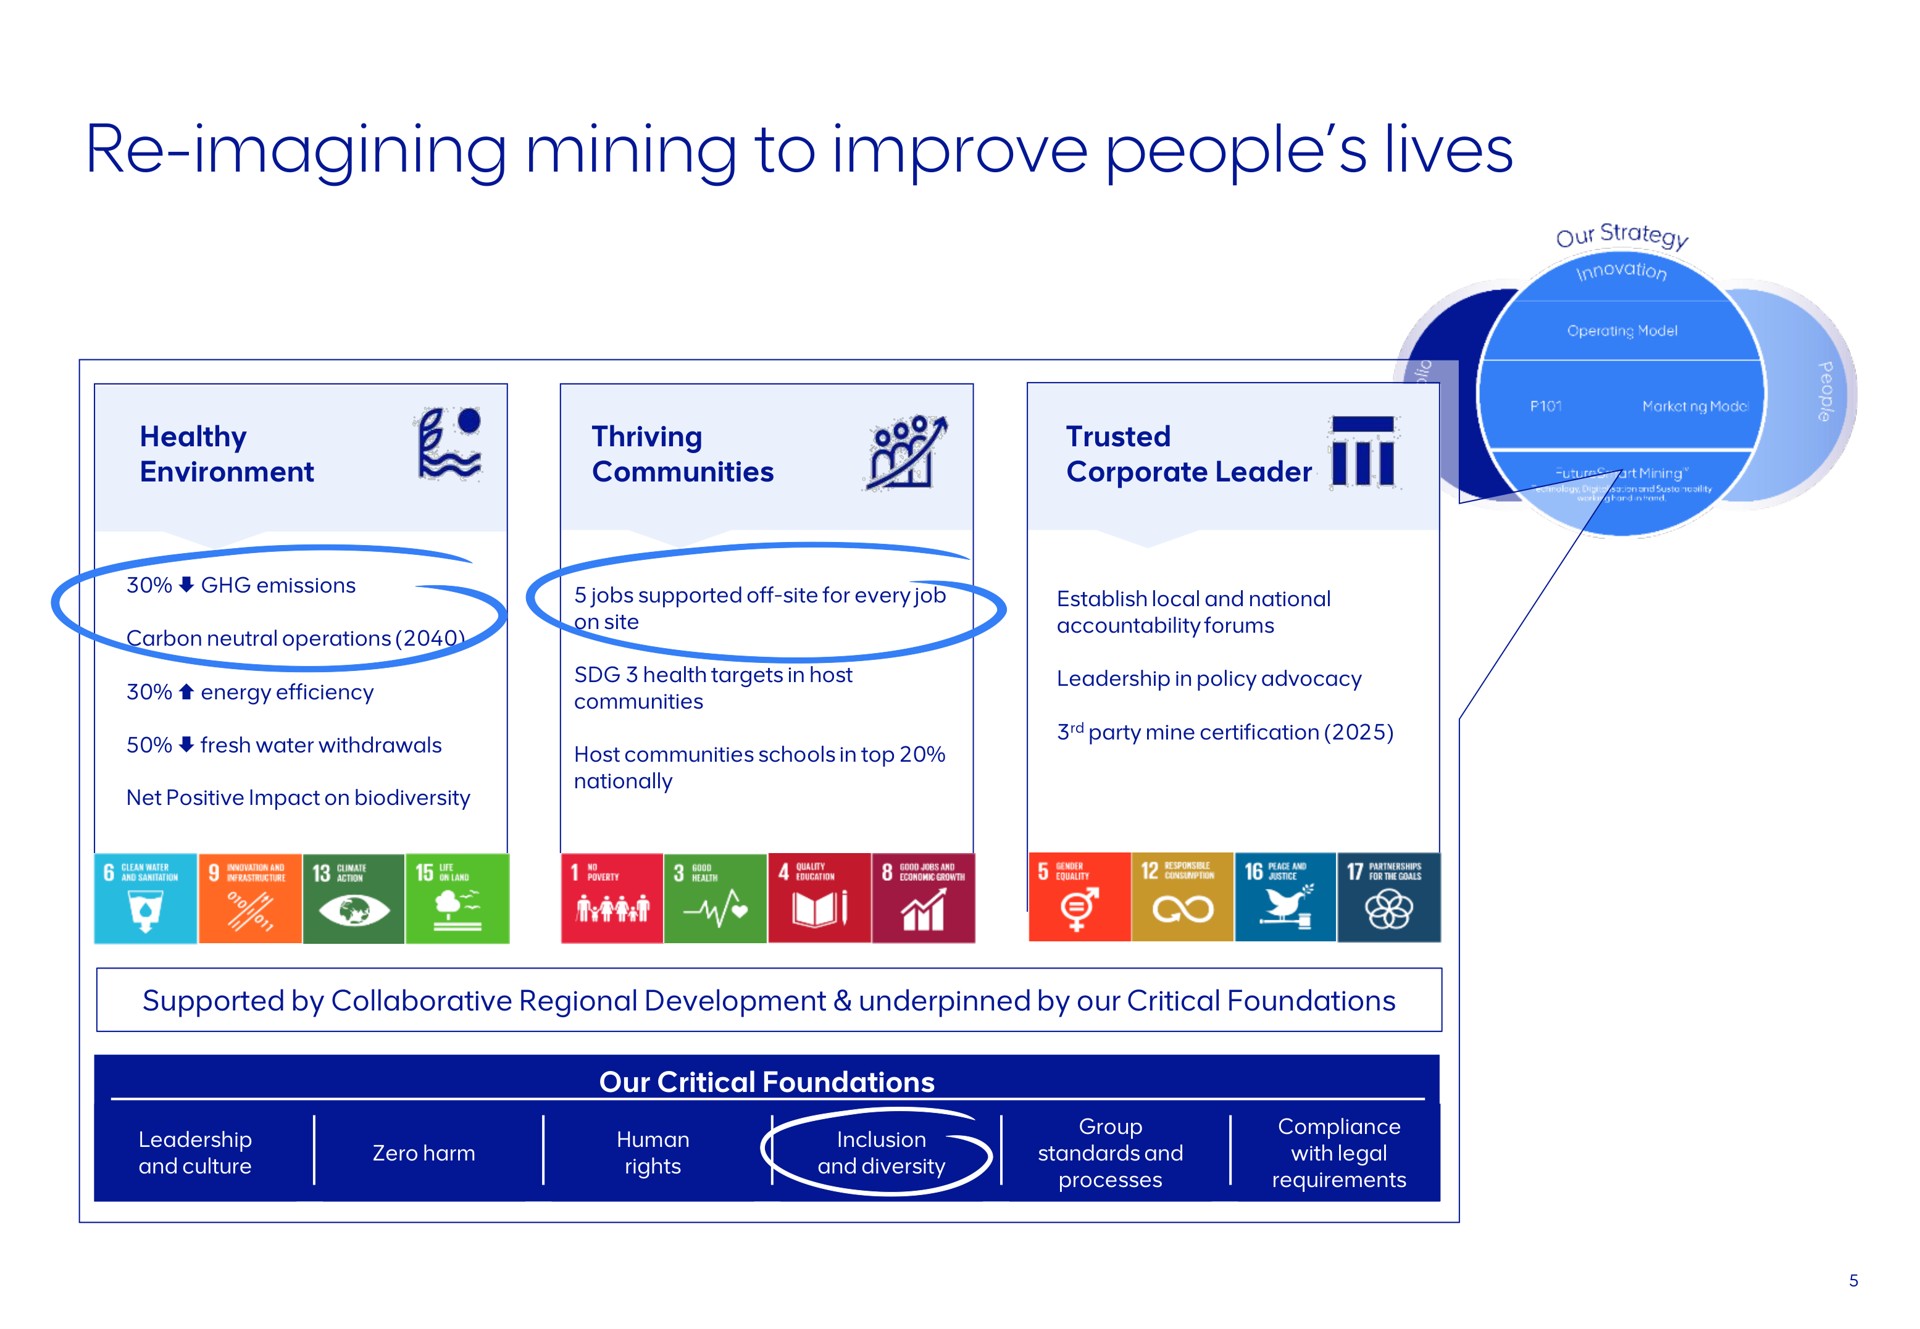 imagining mining to improve people lives | AngloAmerican